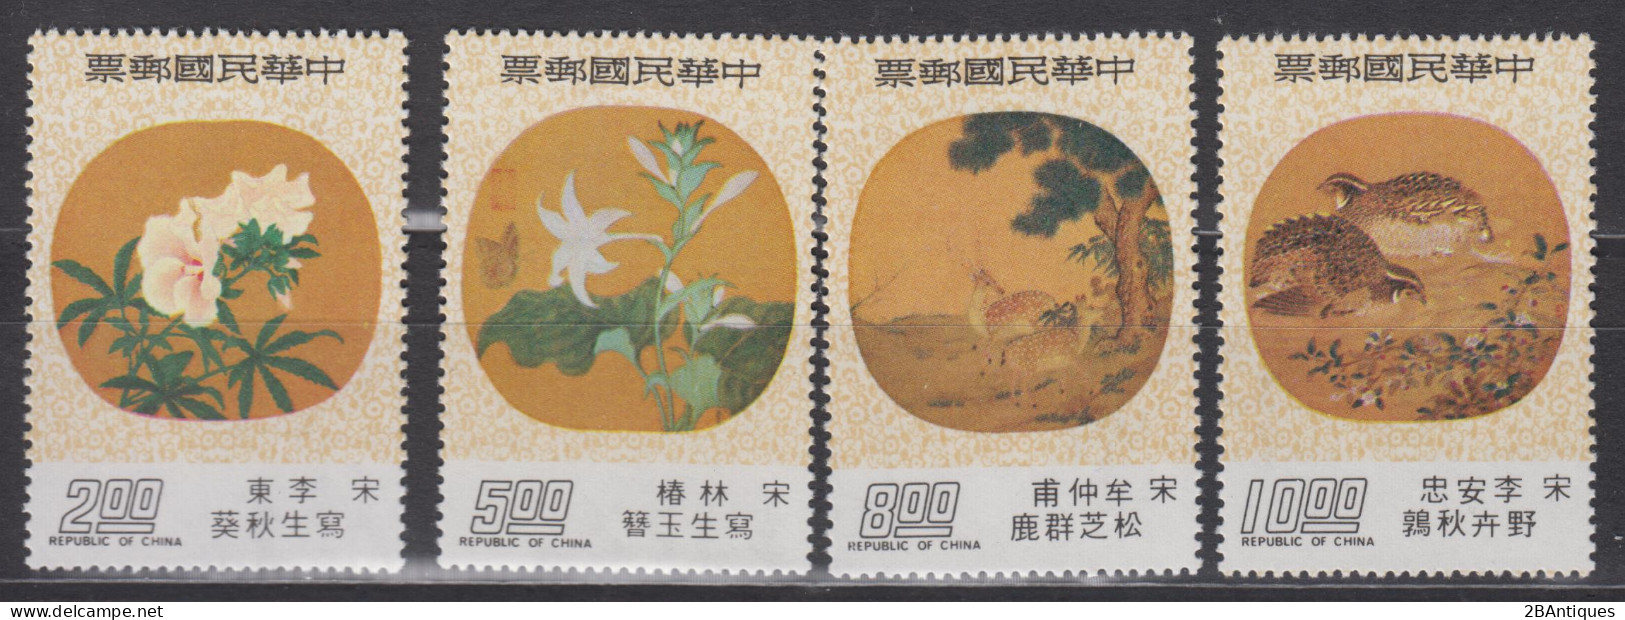 TAIWAN 1976 - Ancient Chinese Moon-shaped Fan Paintings MNH** OG XF - Neufs